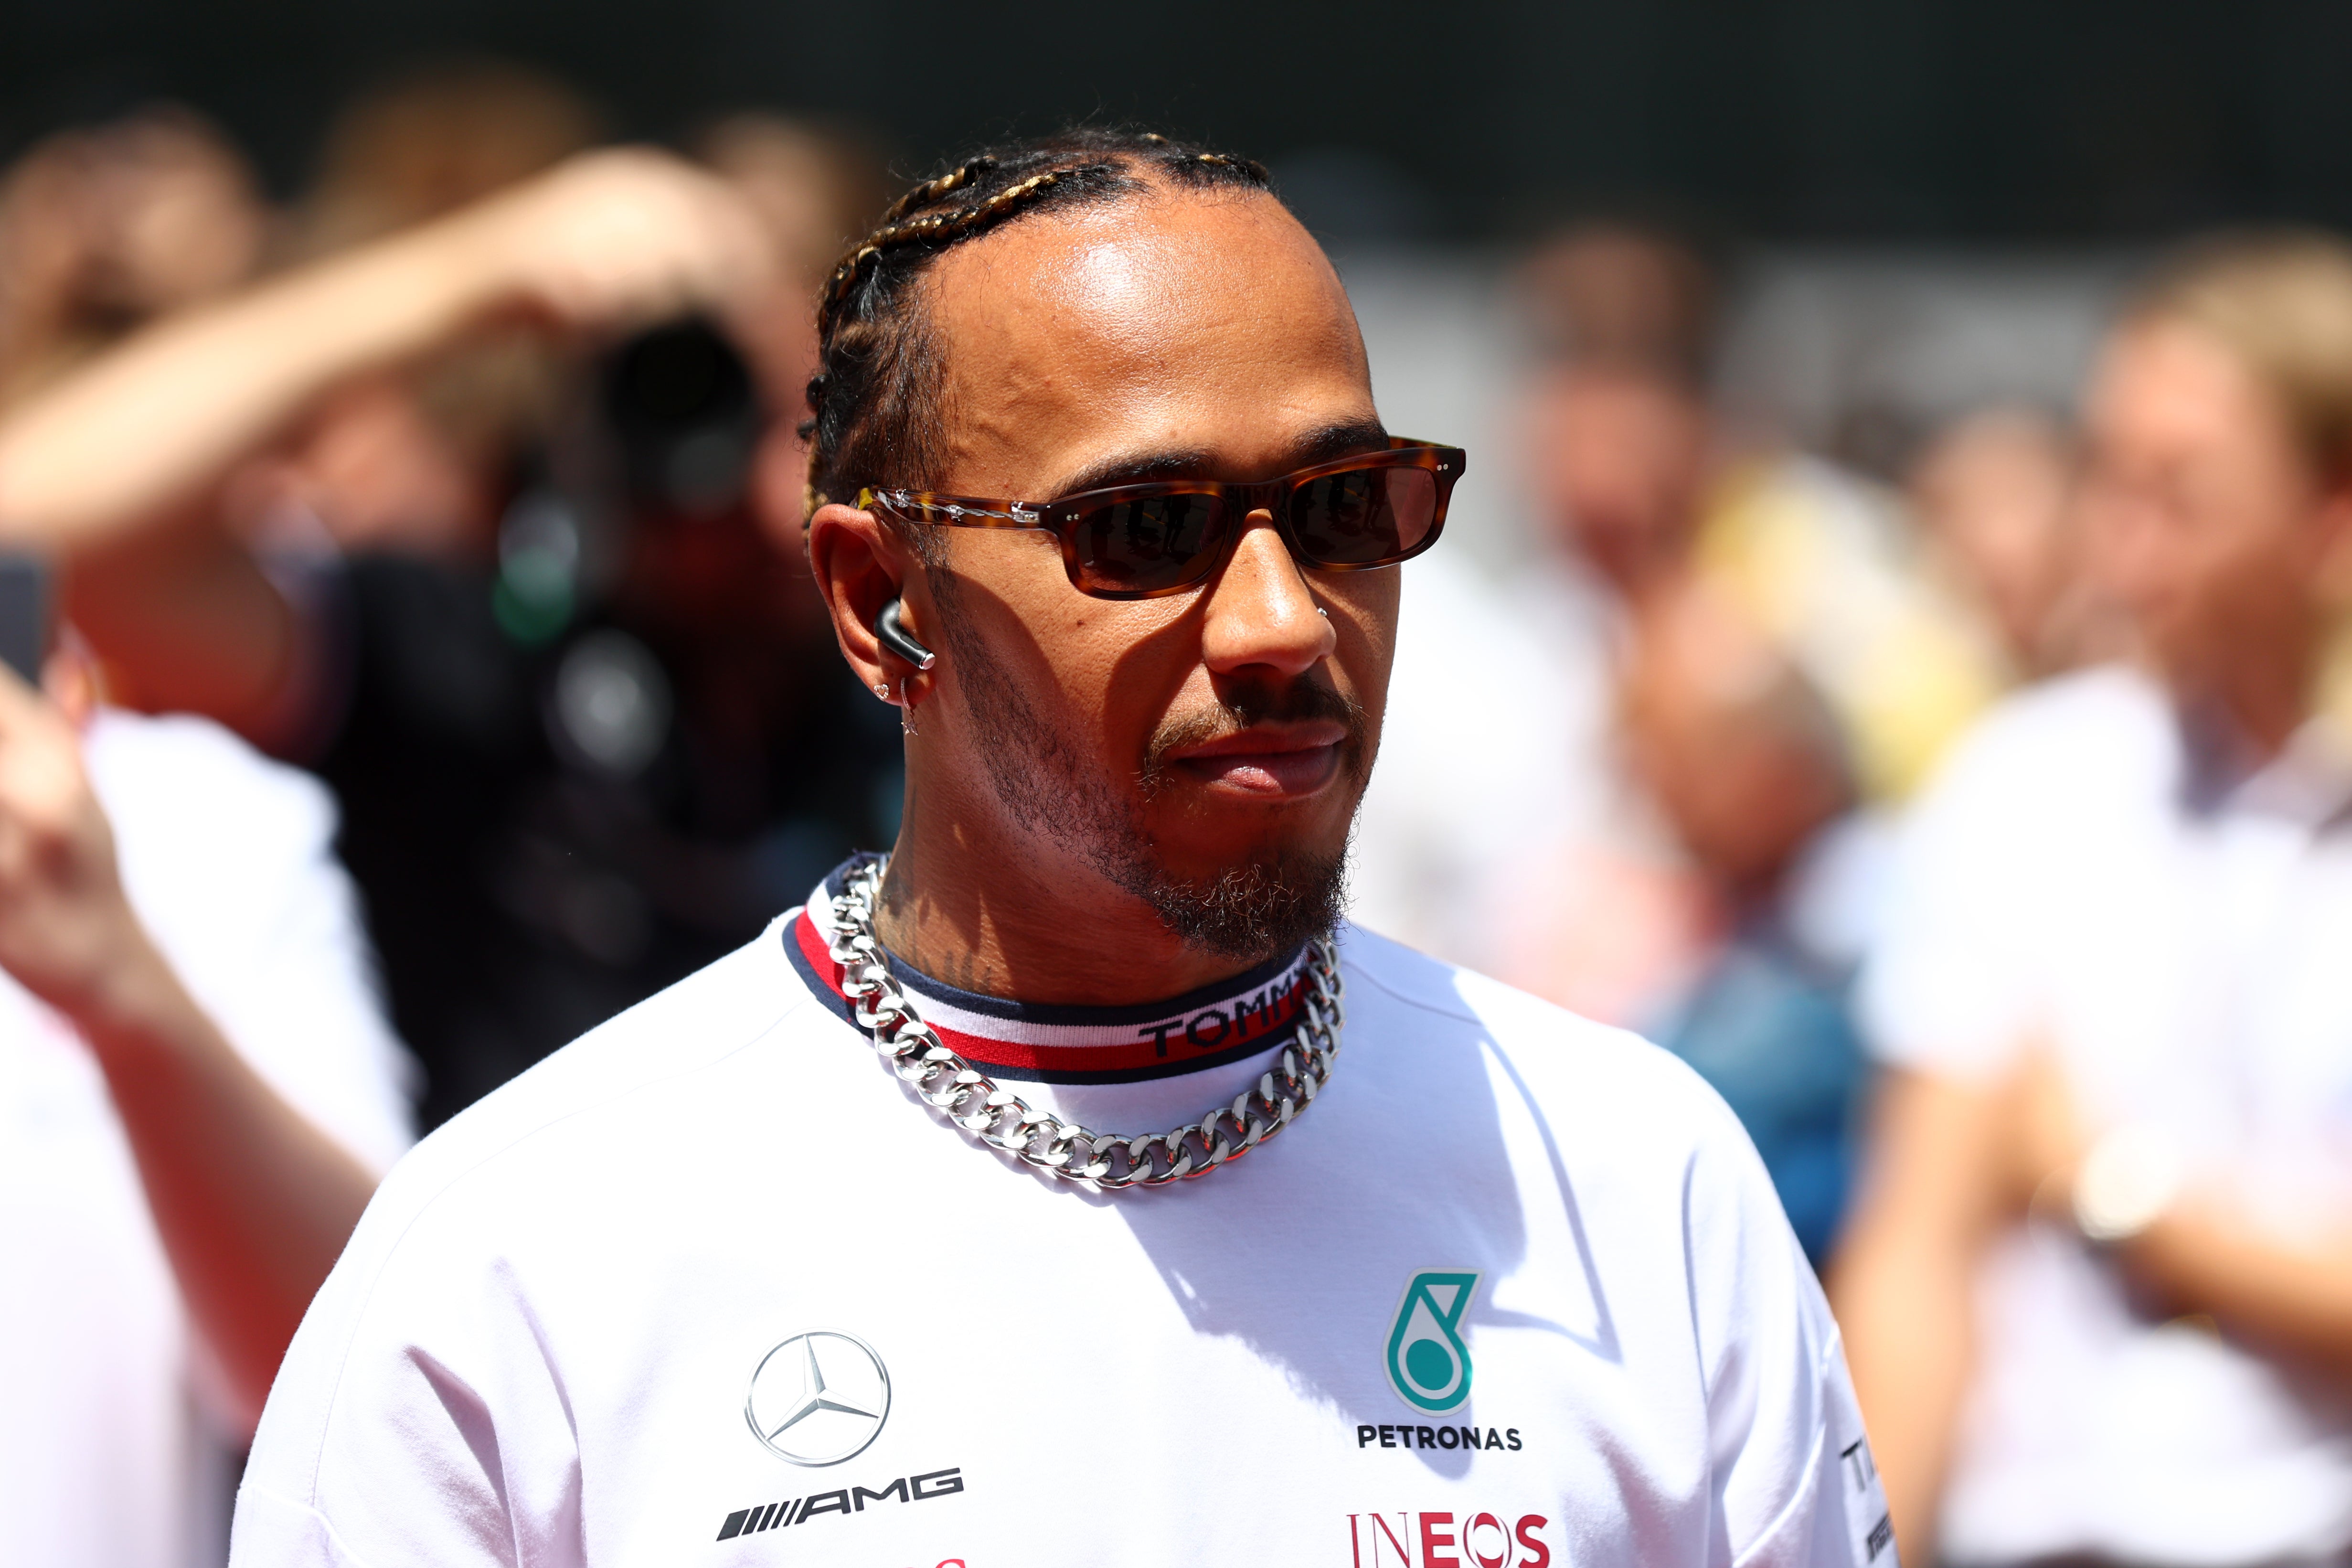 Lewis Hamilton fought back to finish fifth in Barcelona